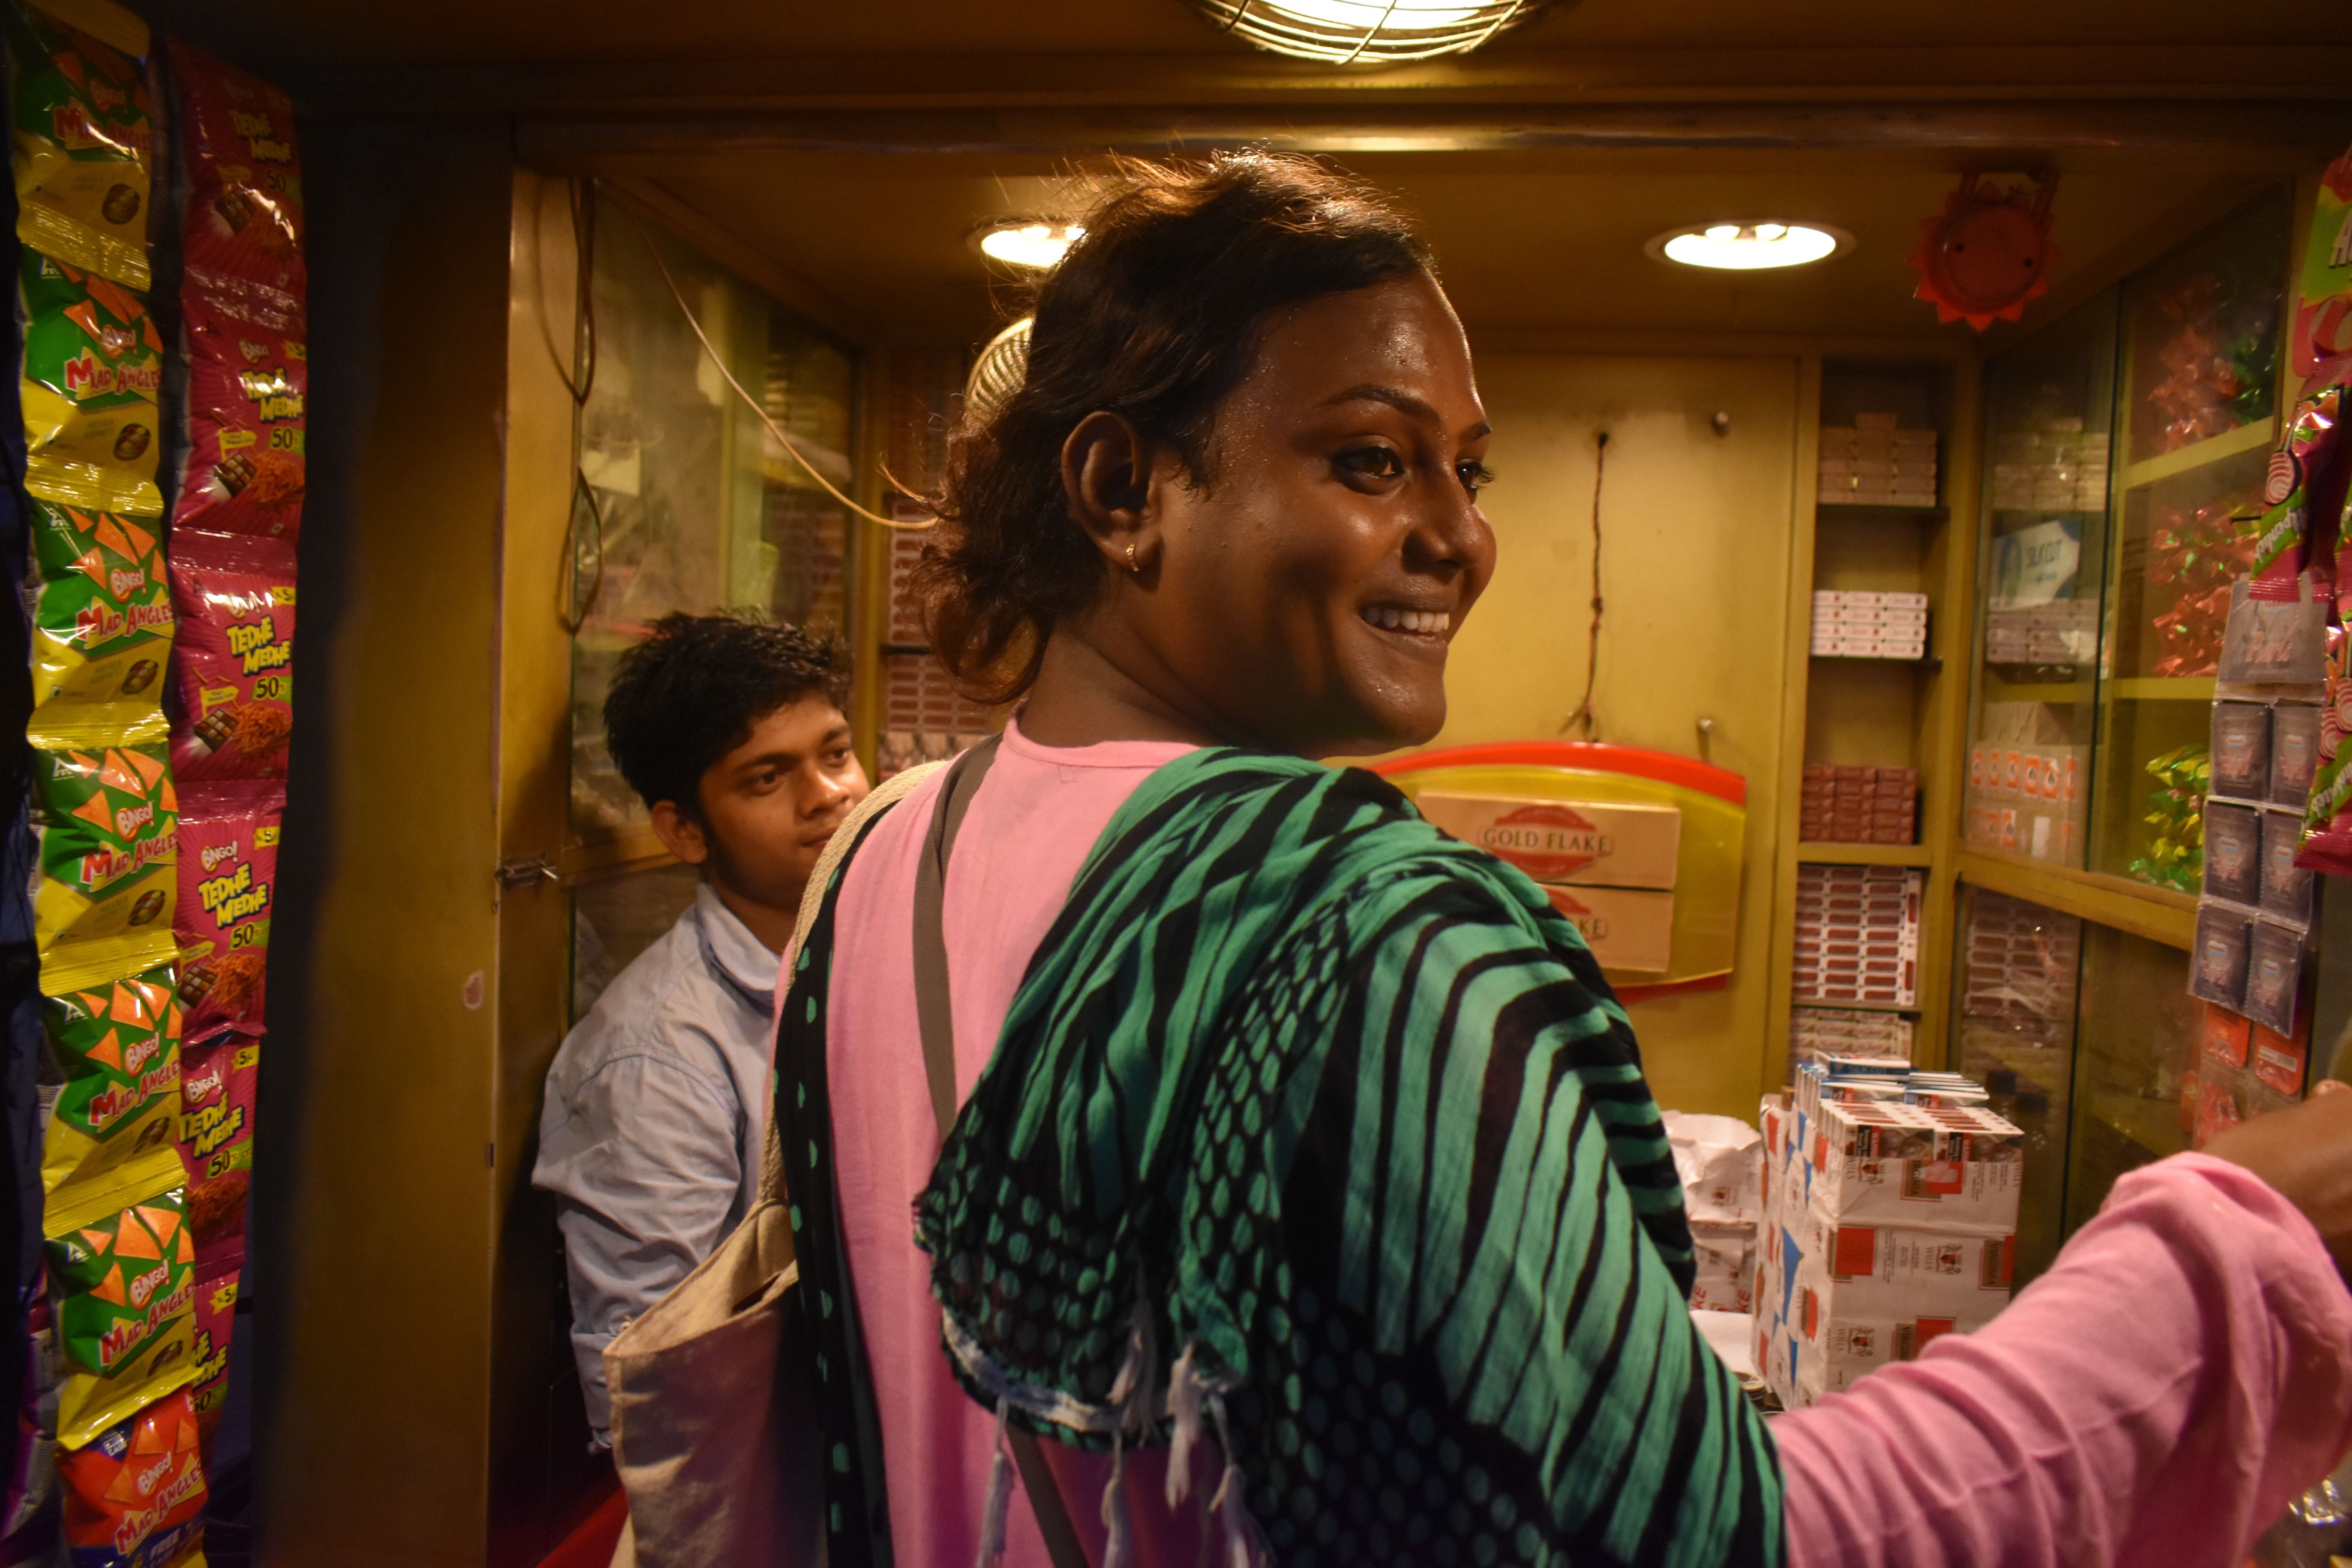 Friendly encounters with a shopkeeper. Image by Siyona Ravi. India, 2017.